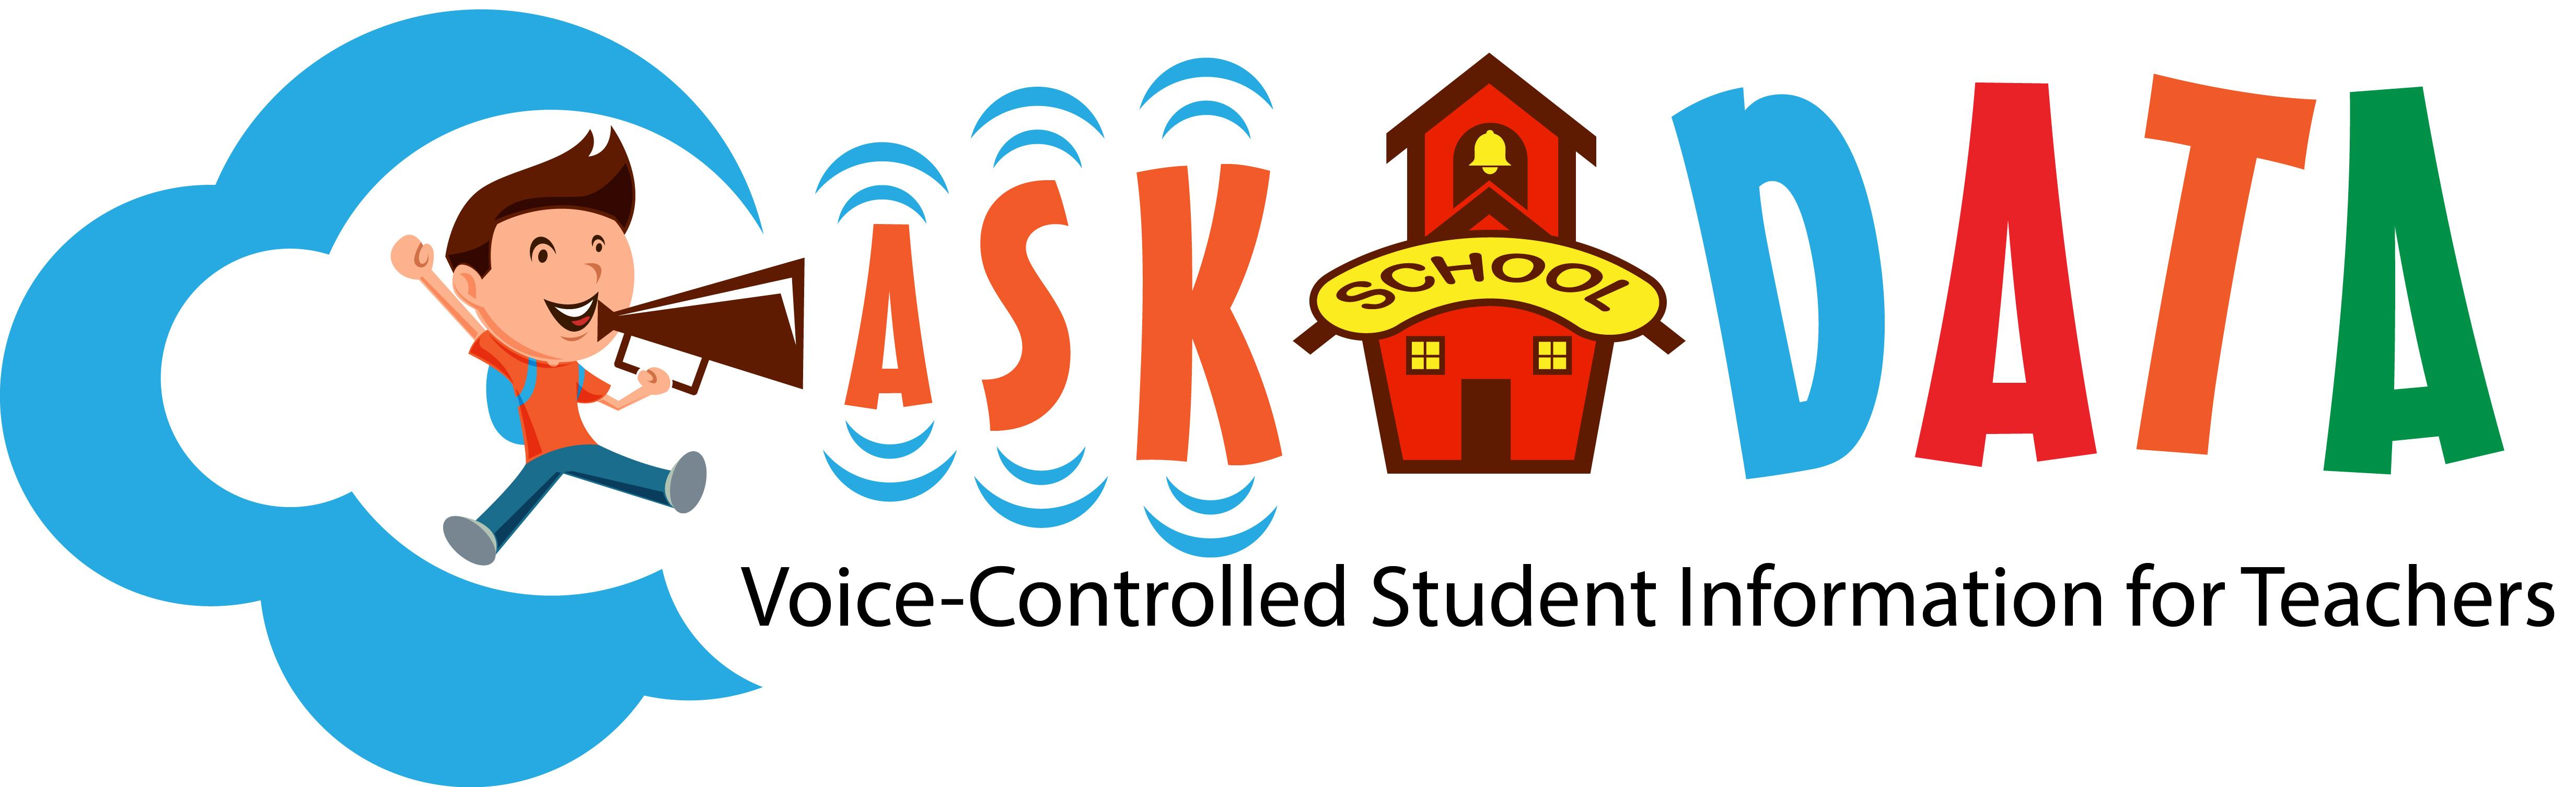 Ask School Logo - Current Private Sector Partners | Leadership, Technology, Innovation ...